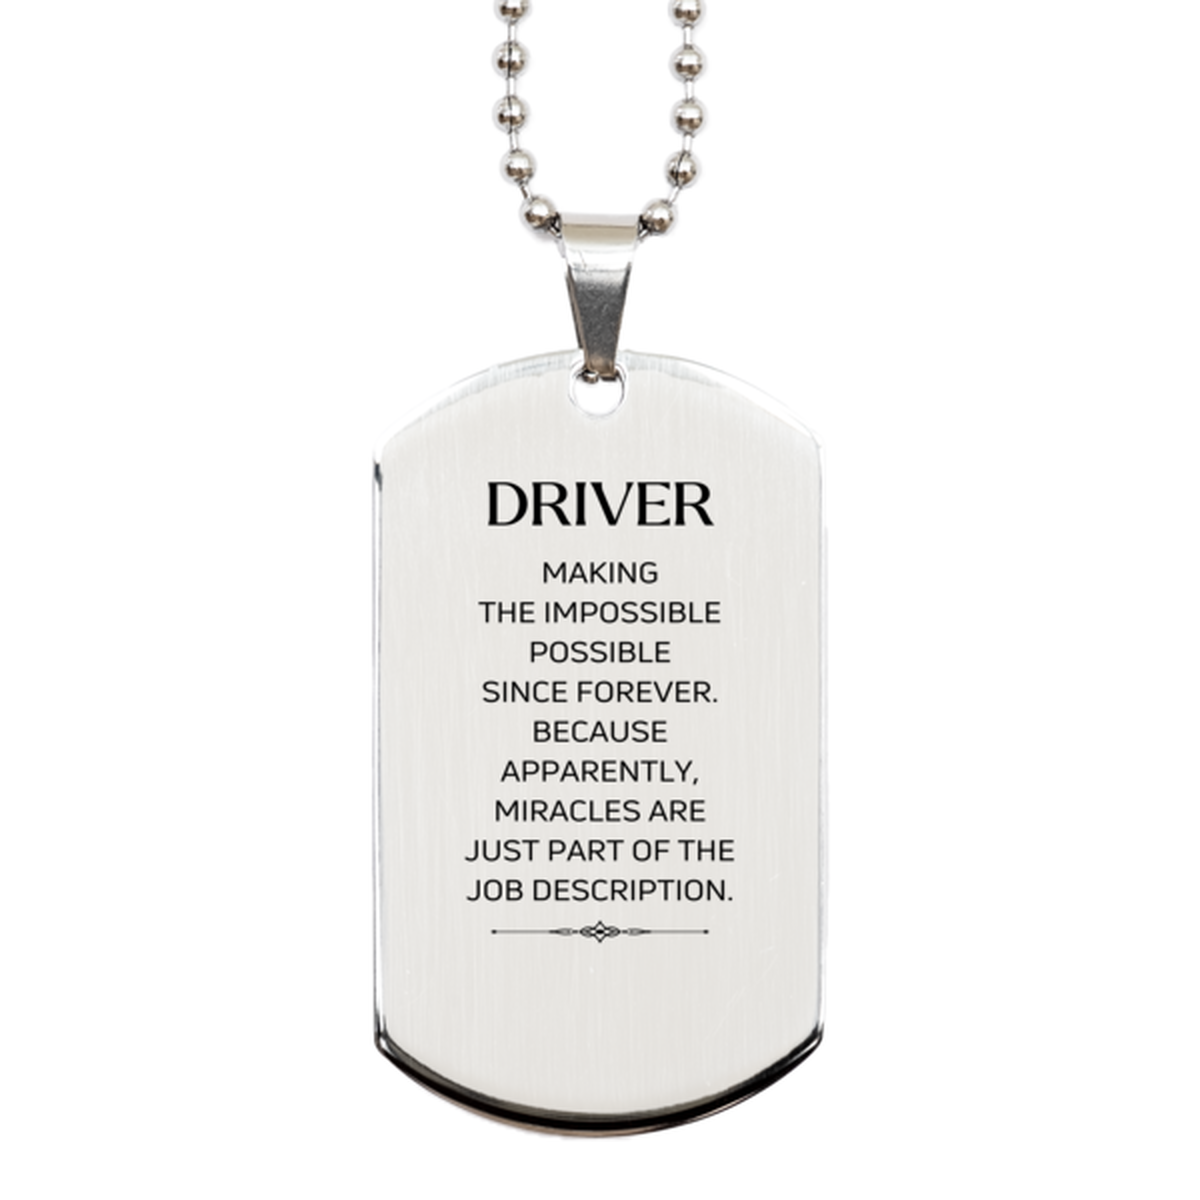 Funny Driver Gifts, Miracles are just part of the job description, Inspirational Birthday Silver Dog Tag For Driver, Men, Women, Coworkers, Friends, Boss